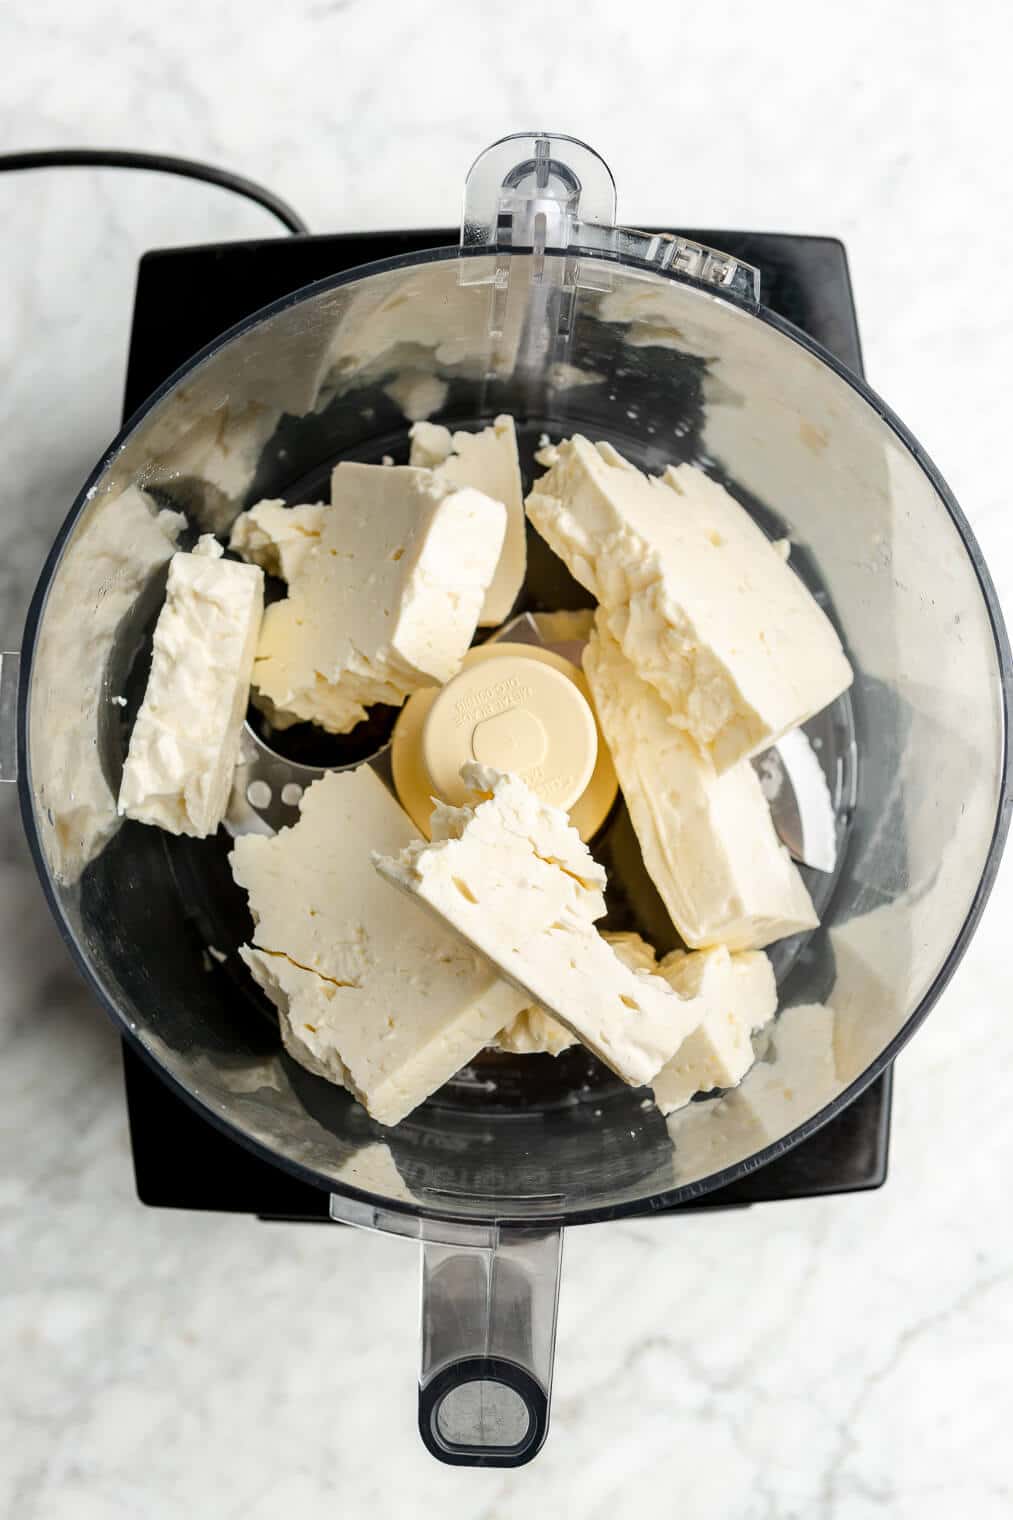 A couple blocks of feta cheese in a food processor.